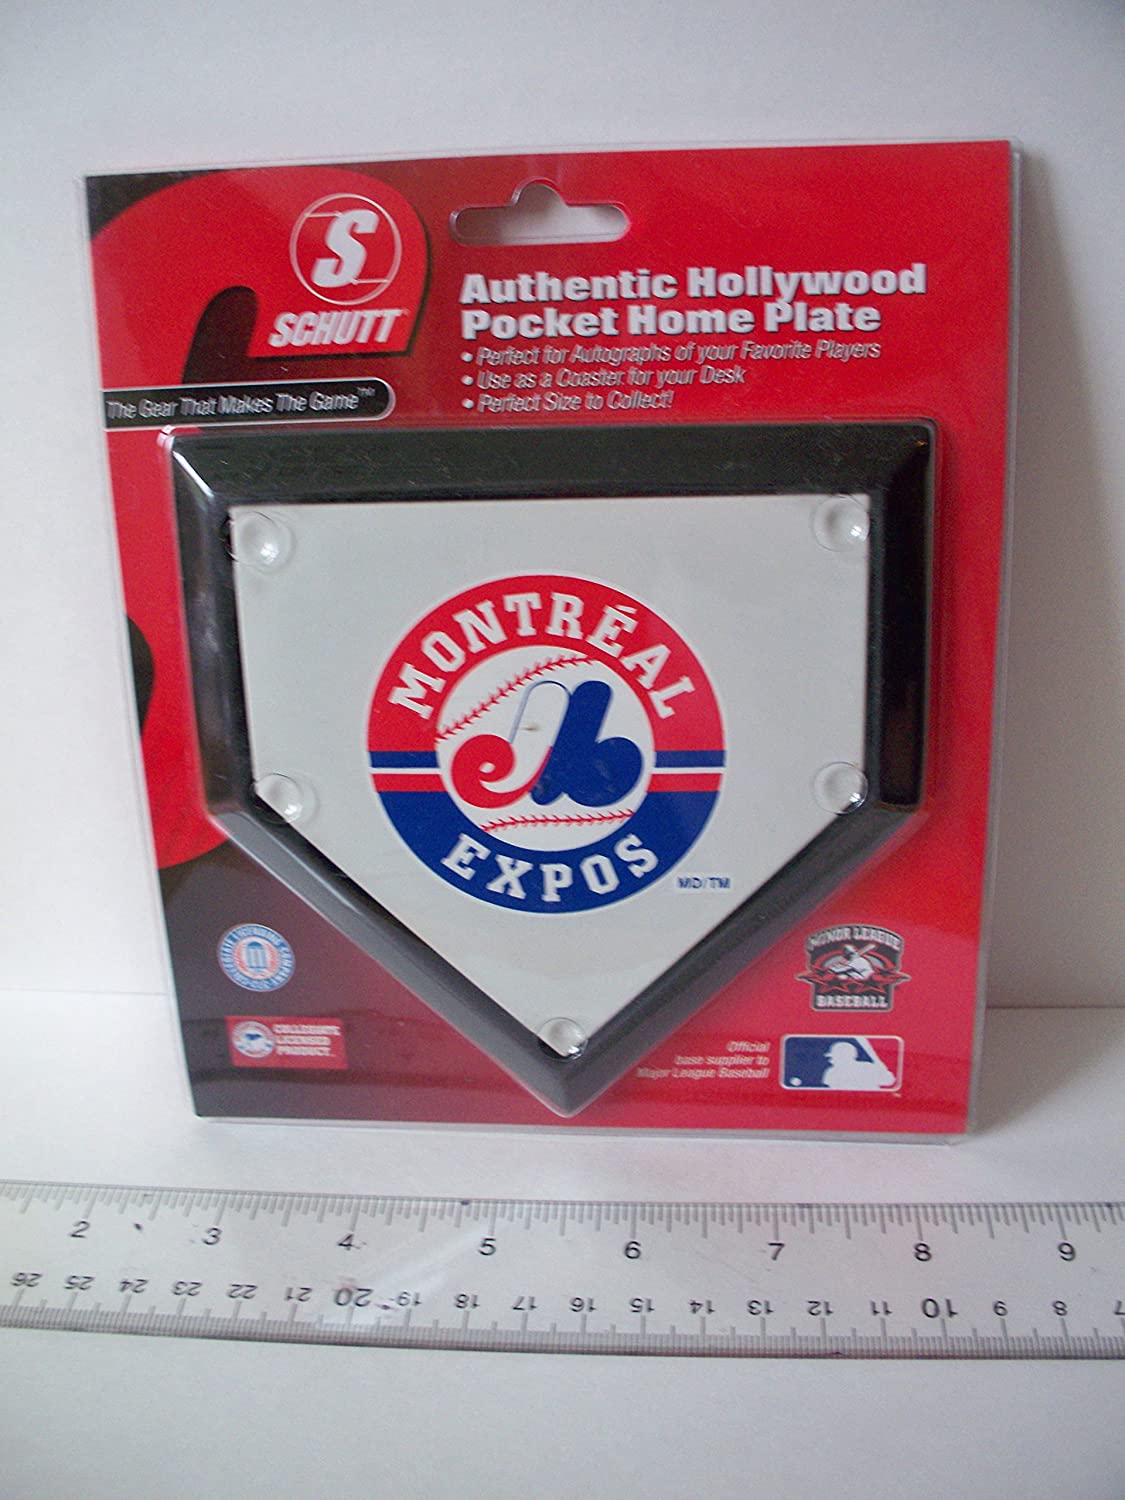 Montreal Expos Authentic Hollywood Pocket Home Plate CO